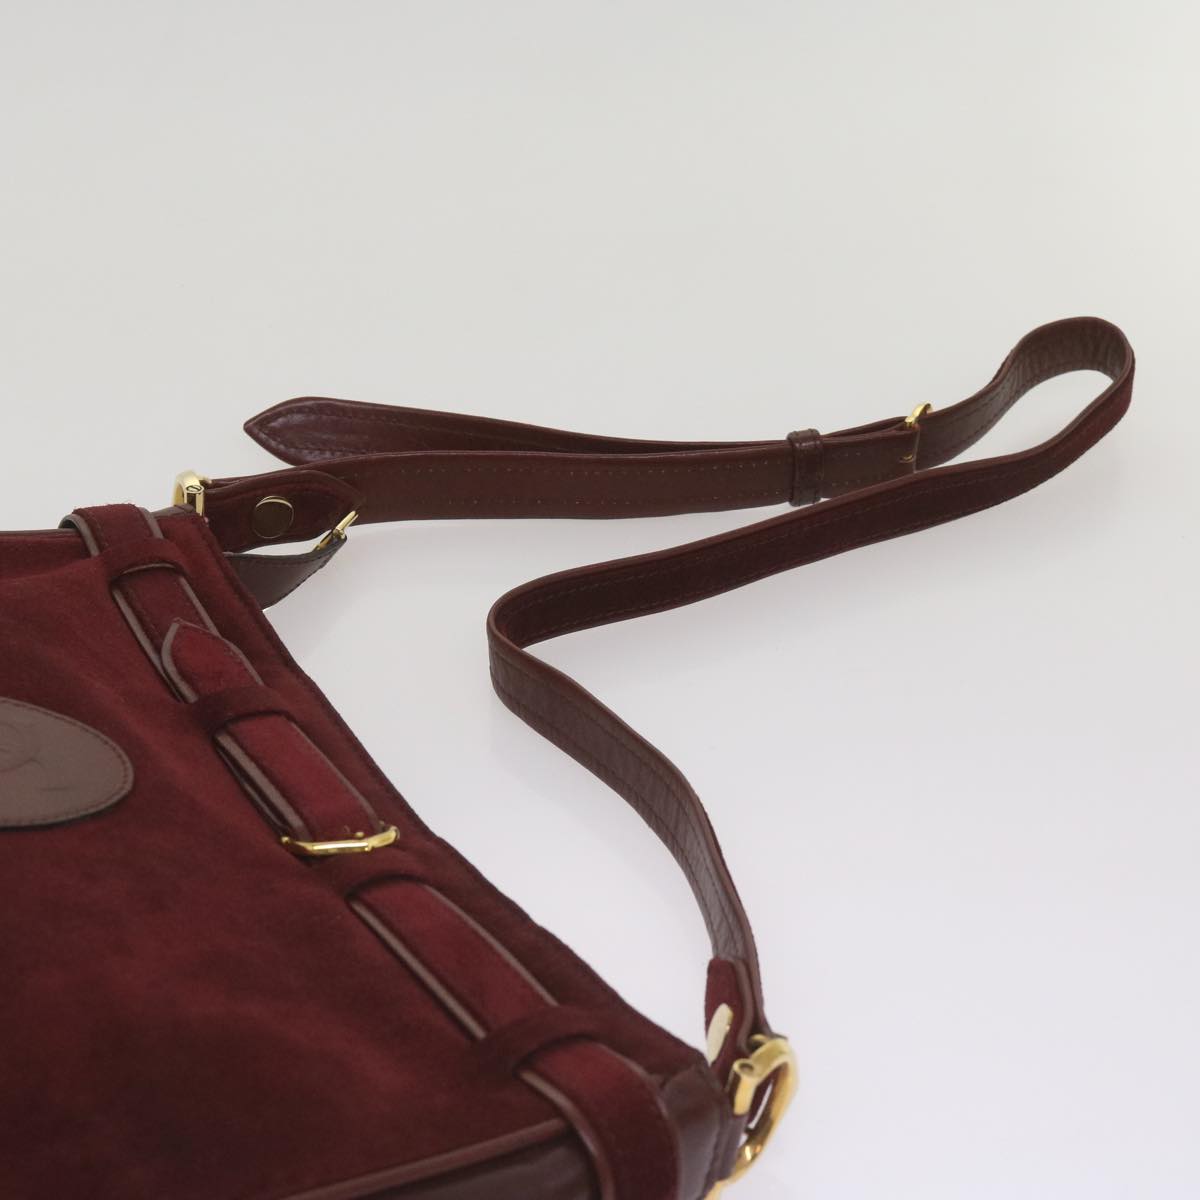 CARTIER Shoulder Bag Suede Leather Wine Red Auth 68255